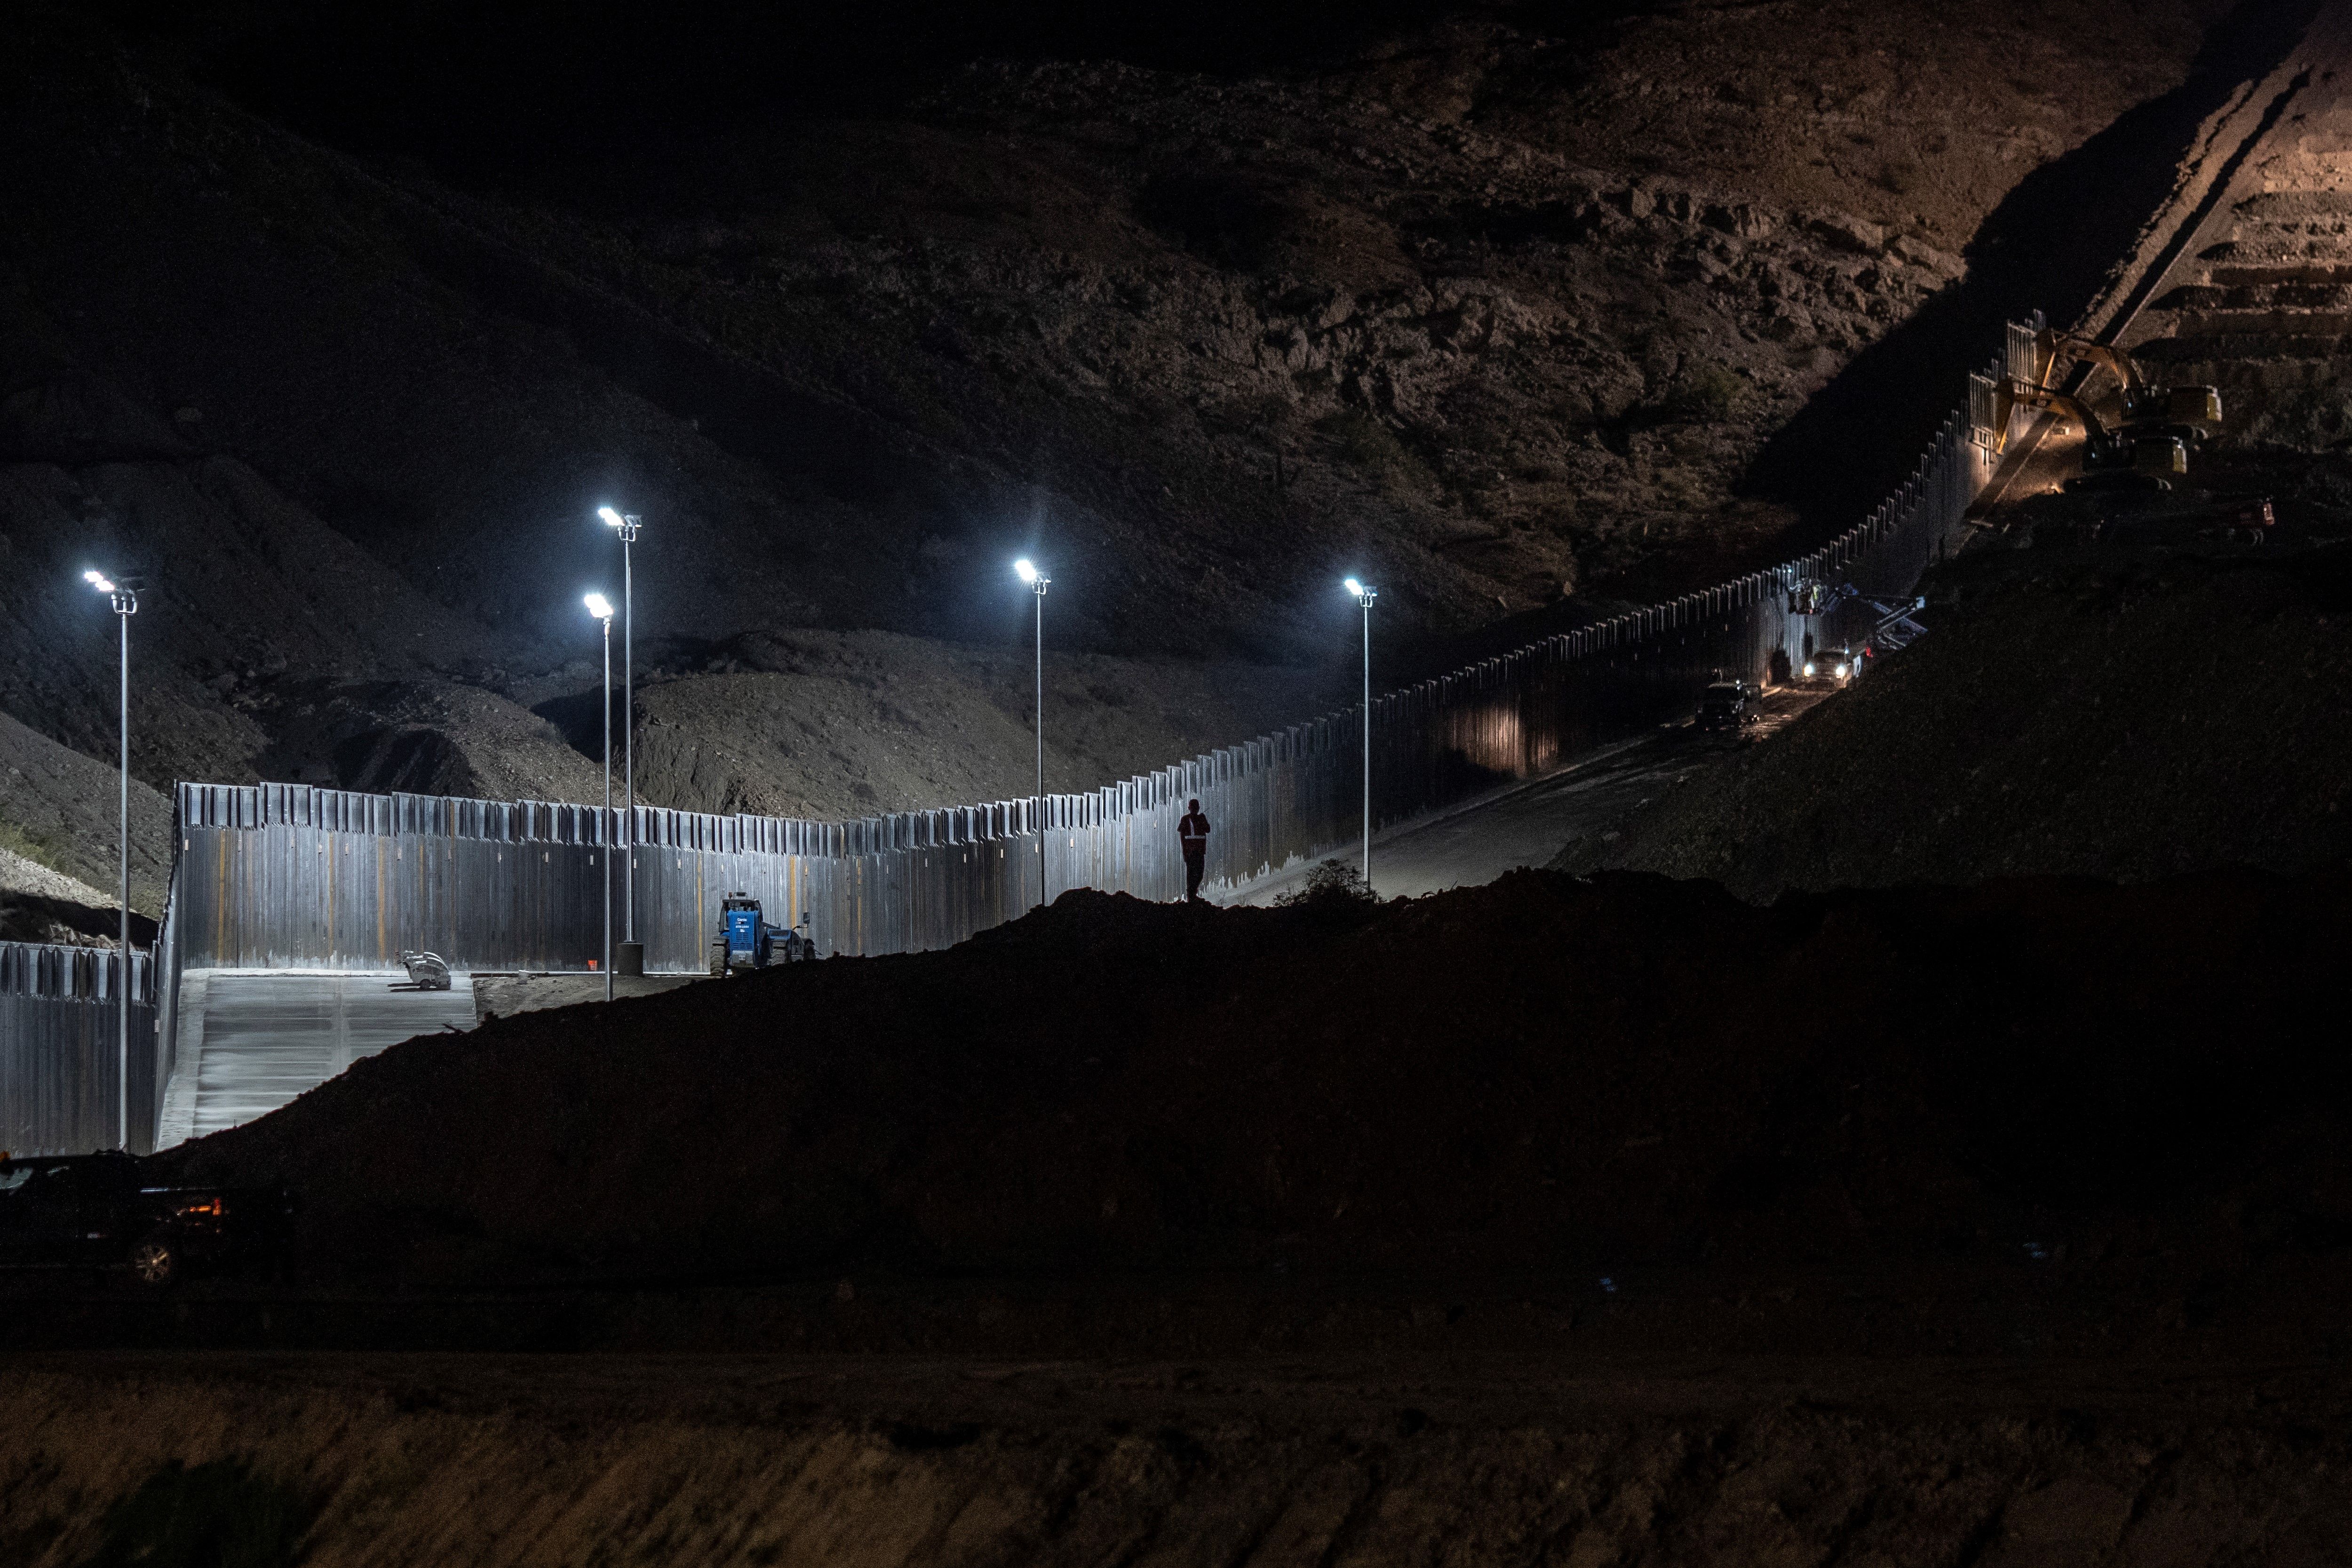 Construction of a border wall is pictured on a piece of private land located directly on the US-Mexican Border owned by the American Eagle Brick Company, late May 30, 2019 in Sunland Park, New Mexico. - "We Build The Wall," a group which has collected about $20 million from donors on GoFundMe to build their own section of a Bollard fencing "wall" on private land. (Photo by Paul Ratje / AFP)(PAUL RATJE/AFP/Getty Images)